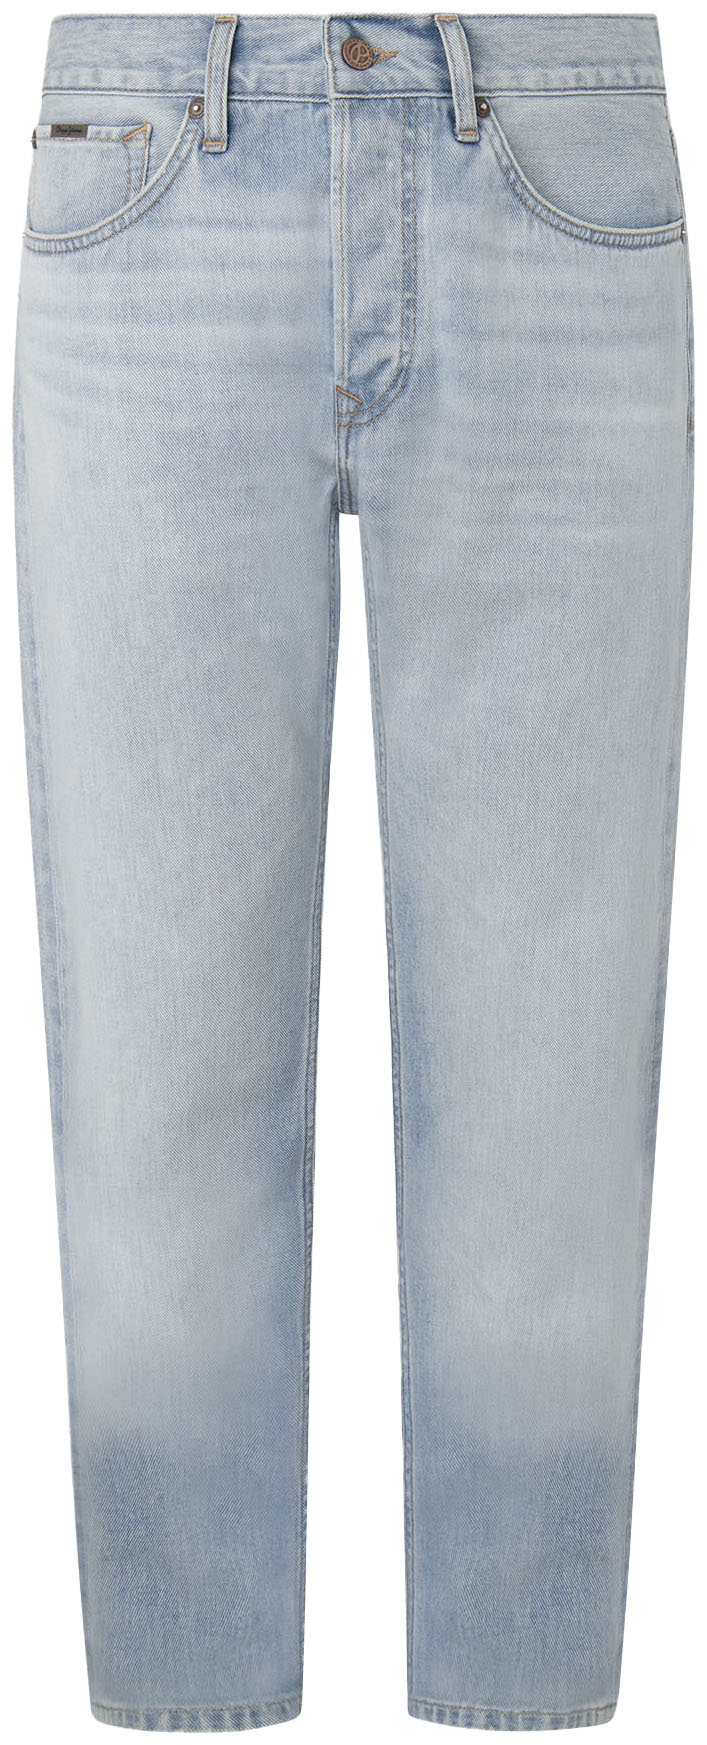 Pepe Jeans 5-Pocket-Jeans »JEANS ALMOST« von Pepe Jeans